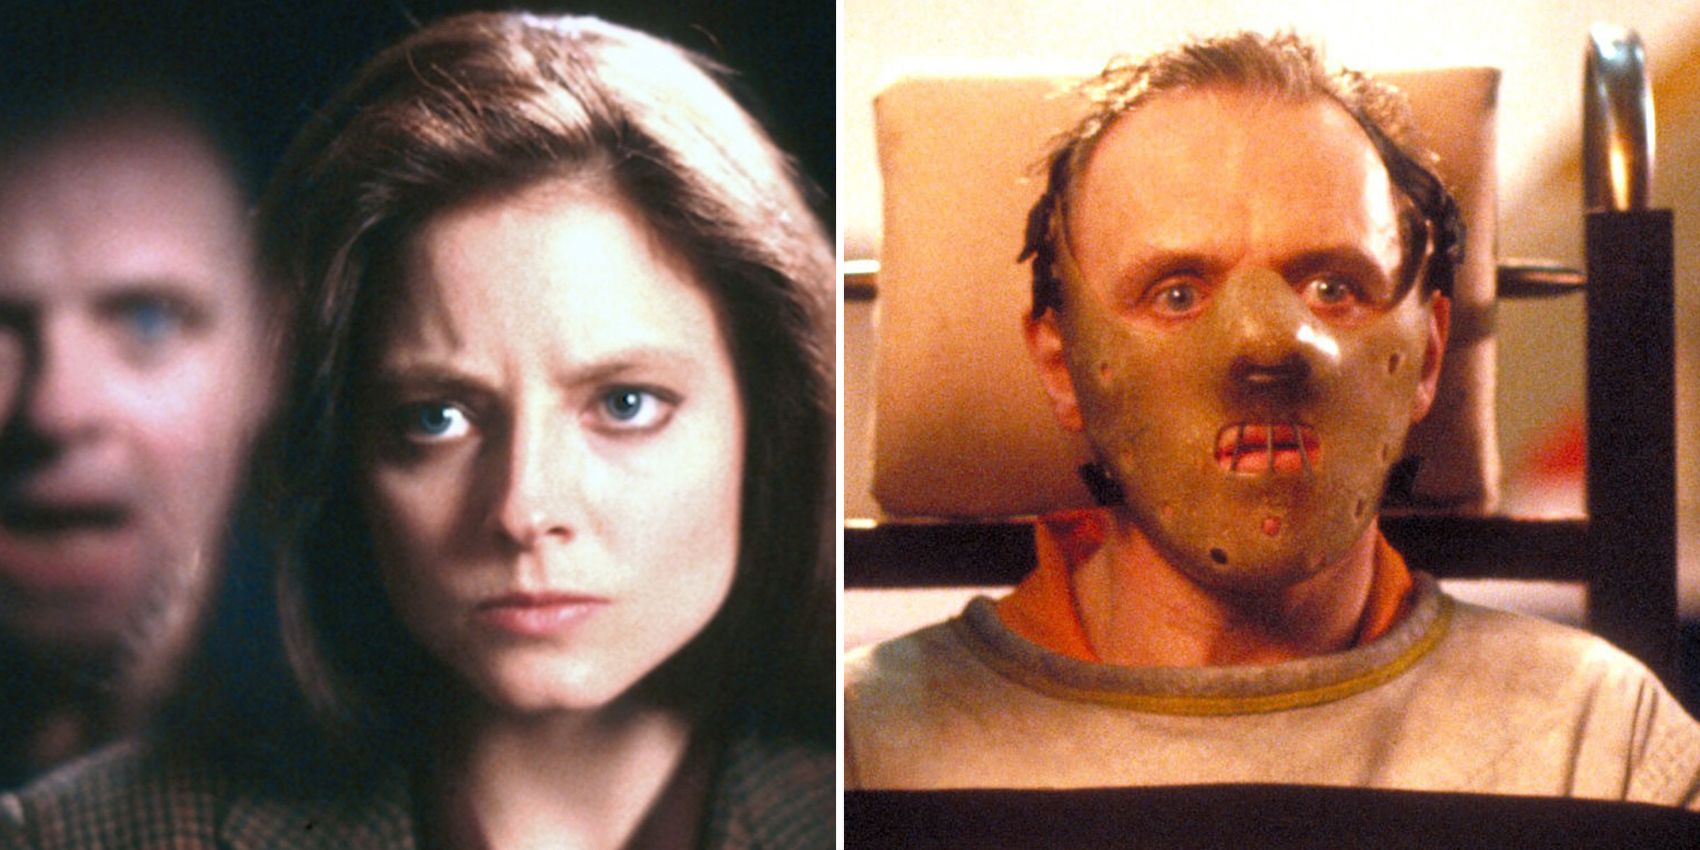 book the silence of the lambs